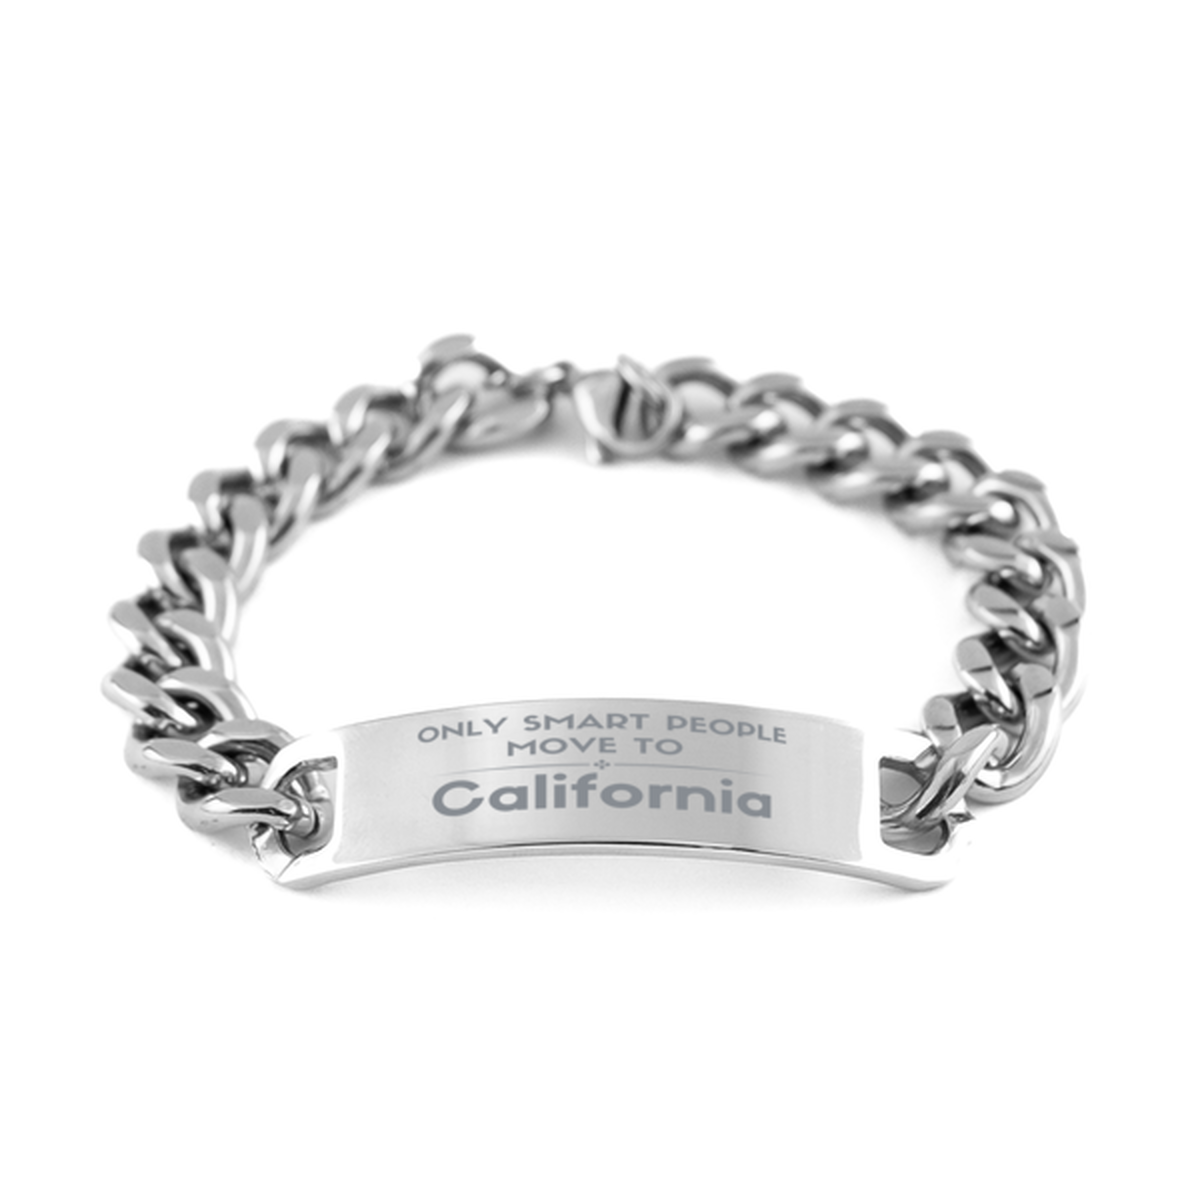 Only smart people move to California Cuban Chain Stainless Steel Bracelet, Gag Gifts For California, Move to California Gifts for Friends Coworker Funny Saying Quote